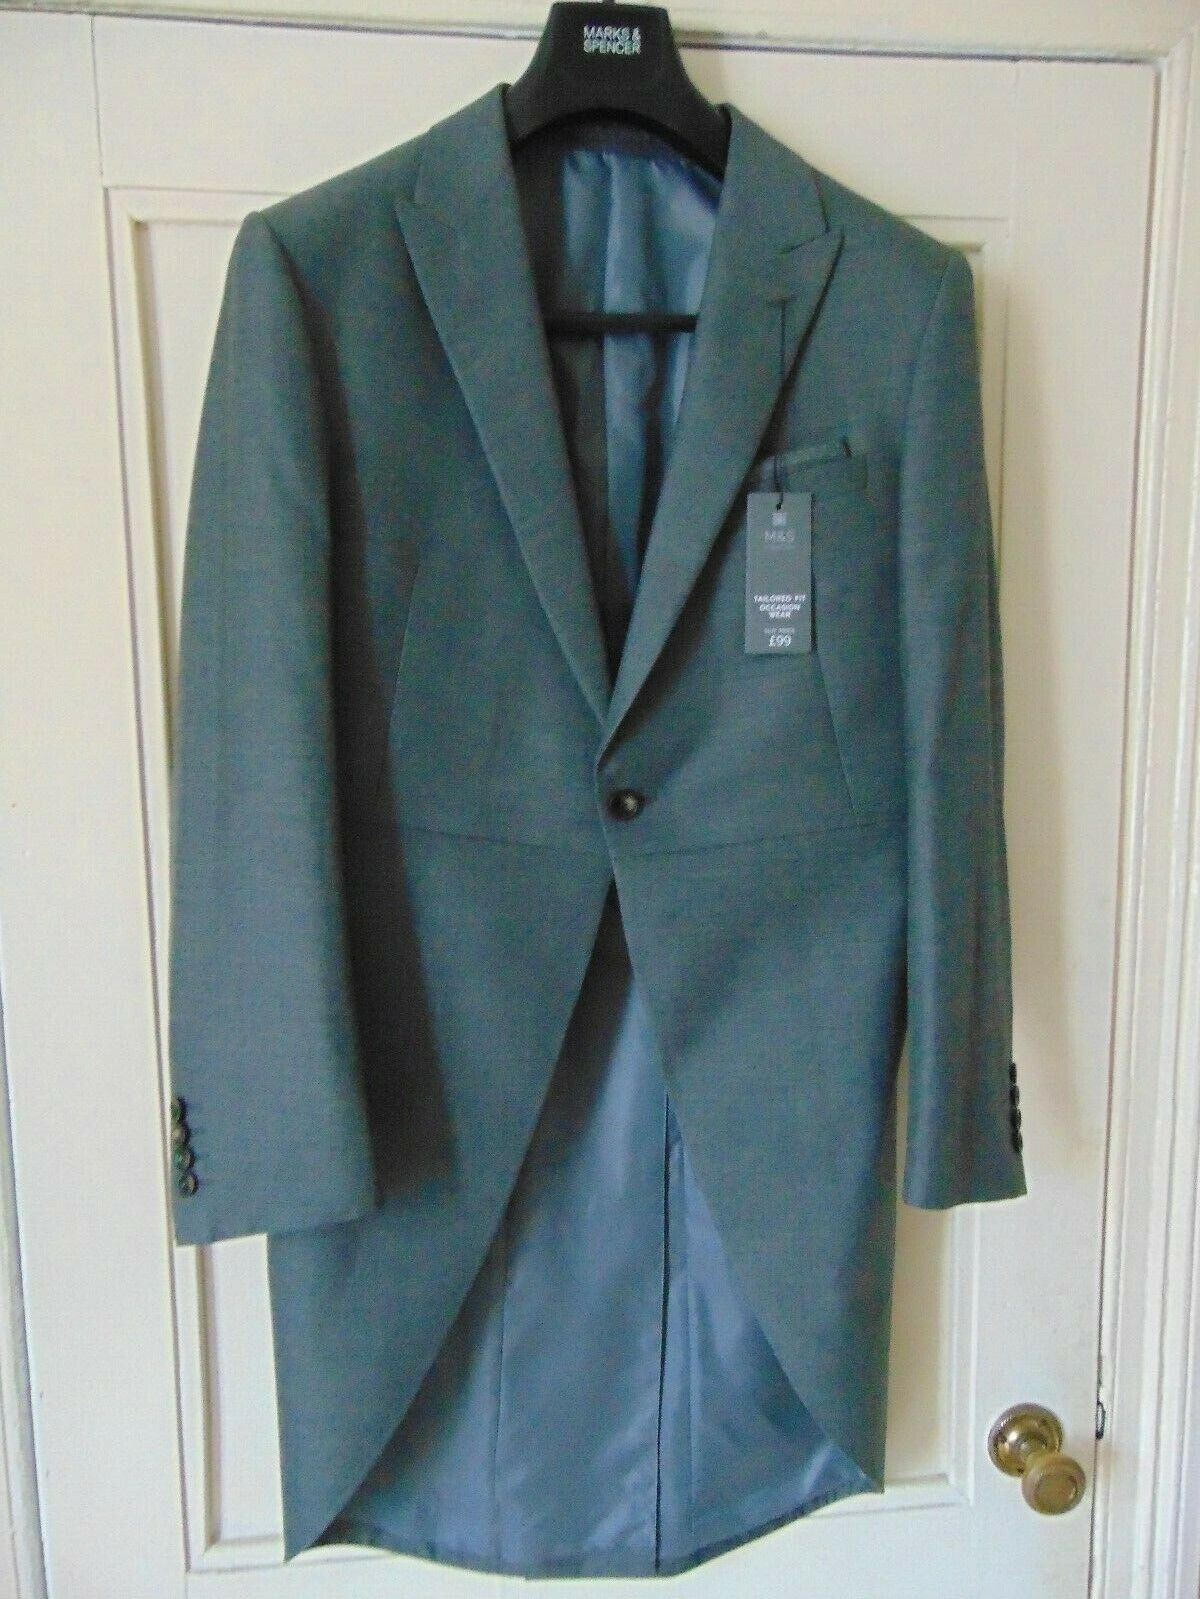 M & S GREY JACKET MORNING SUIT TAILS SIZE 36\